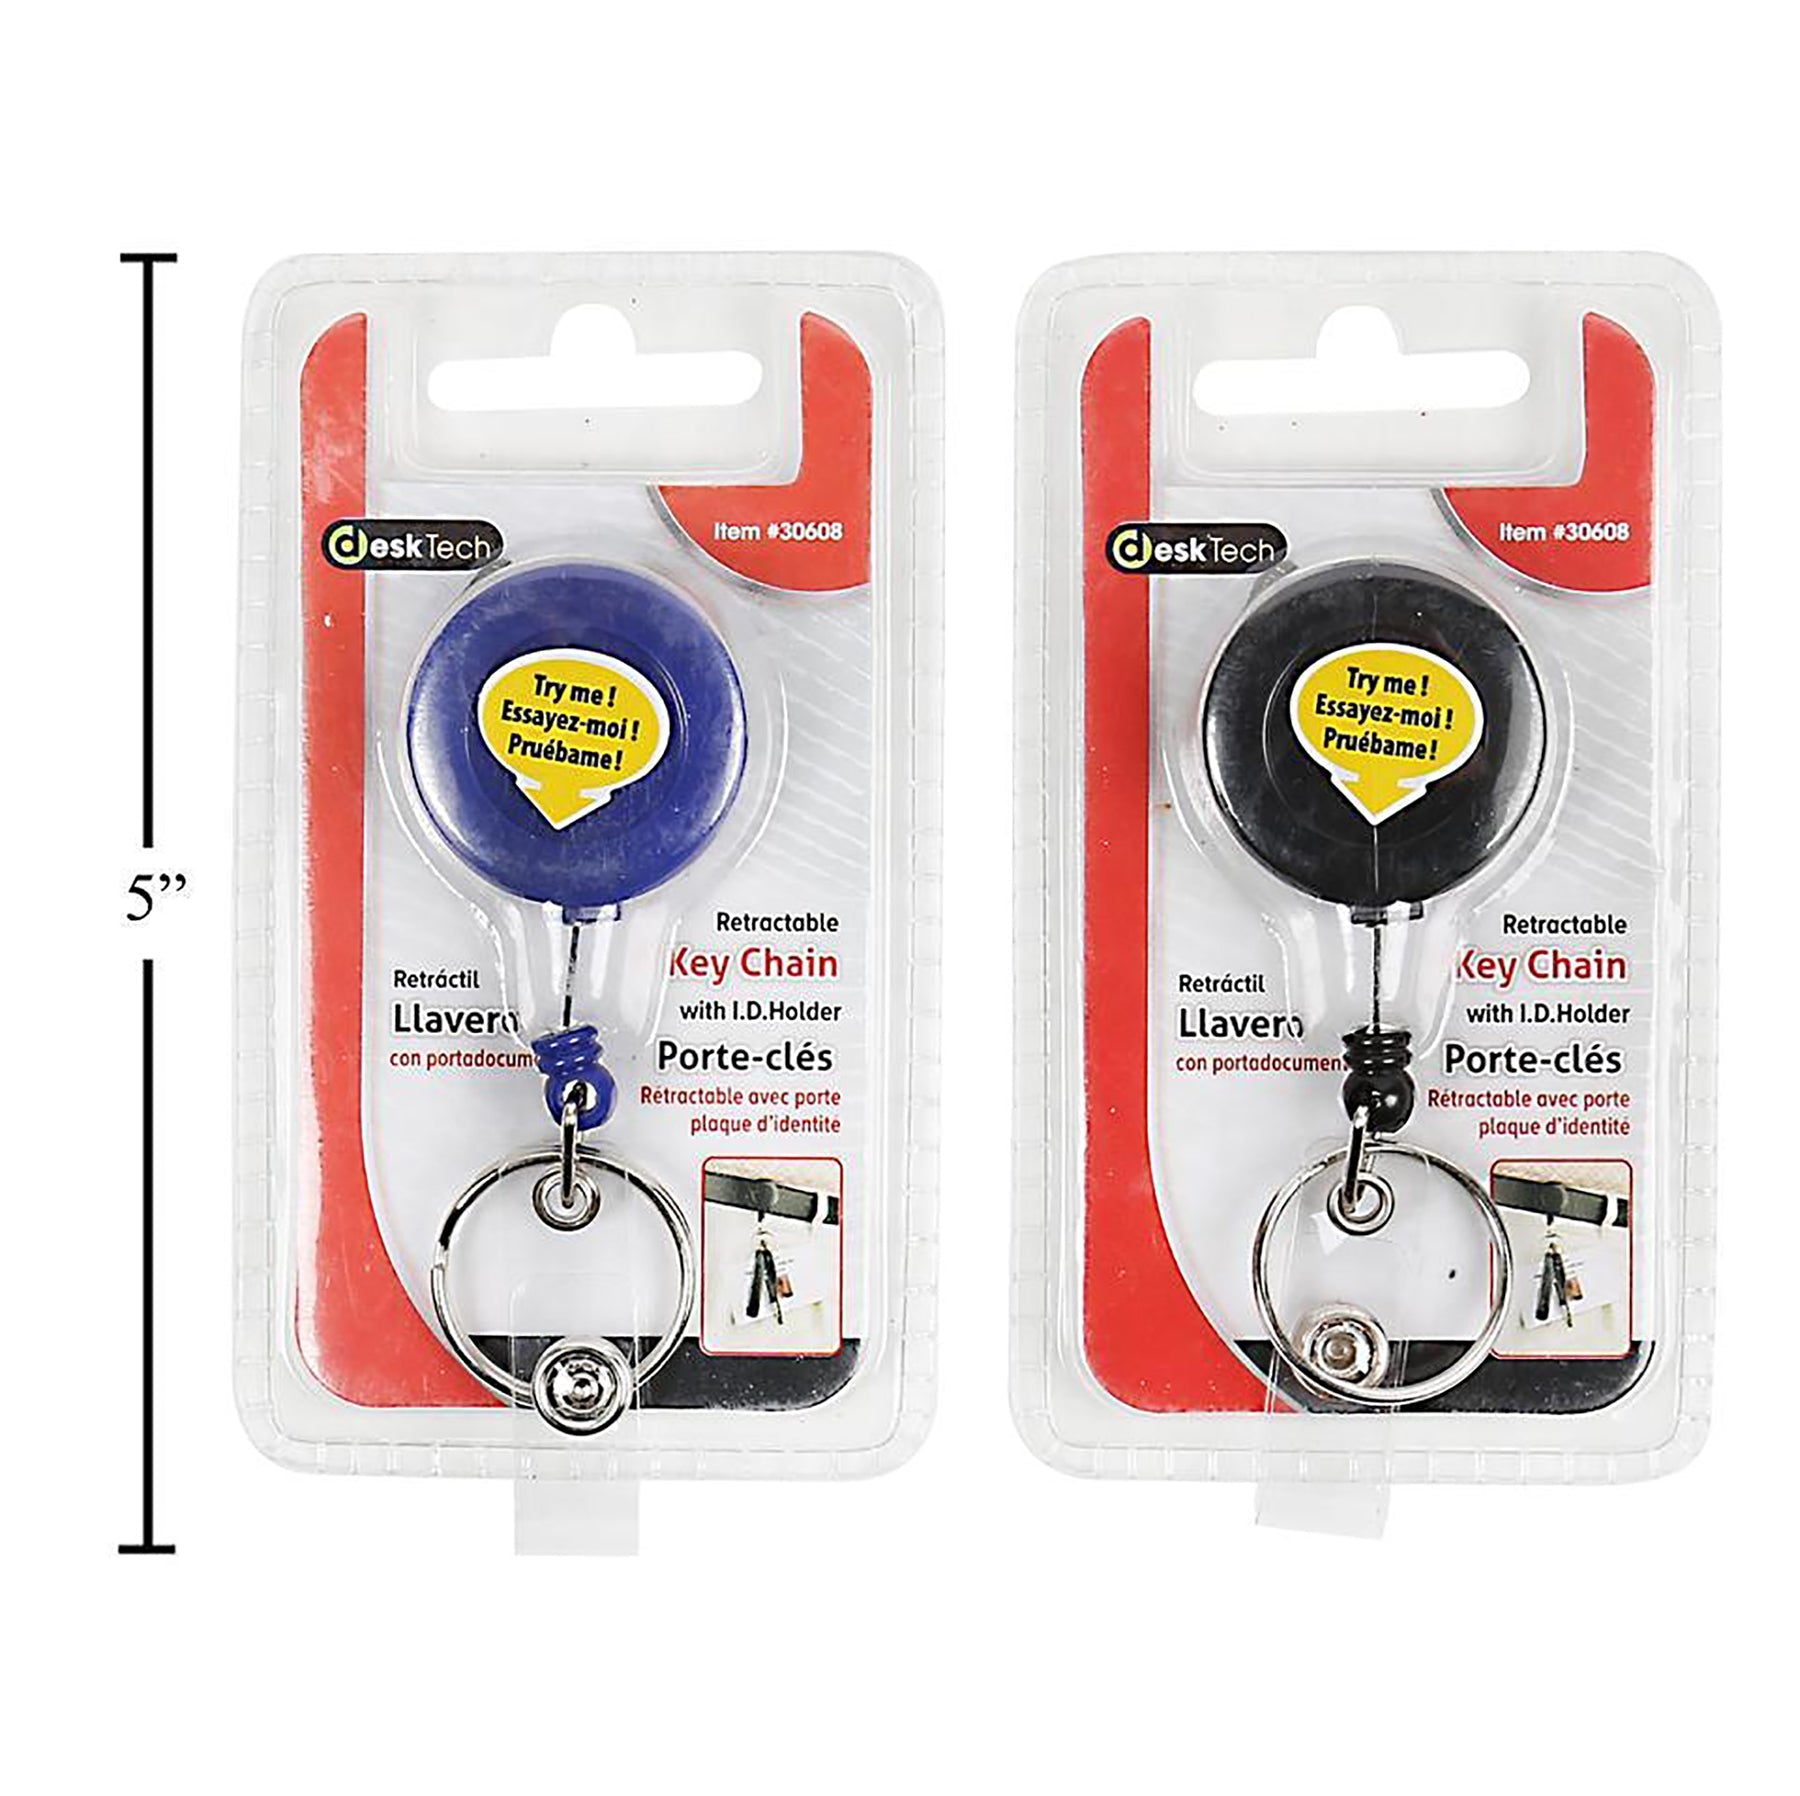 Desk Tech Key Chain with I.D. Holder Retractable 3.6in